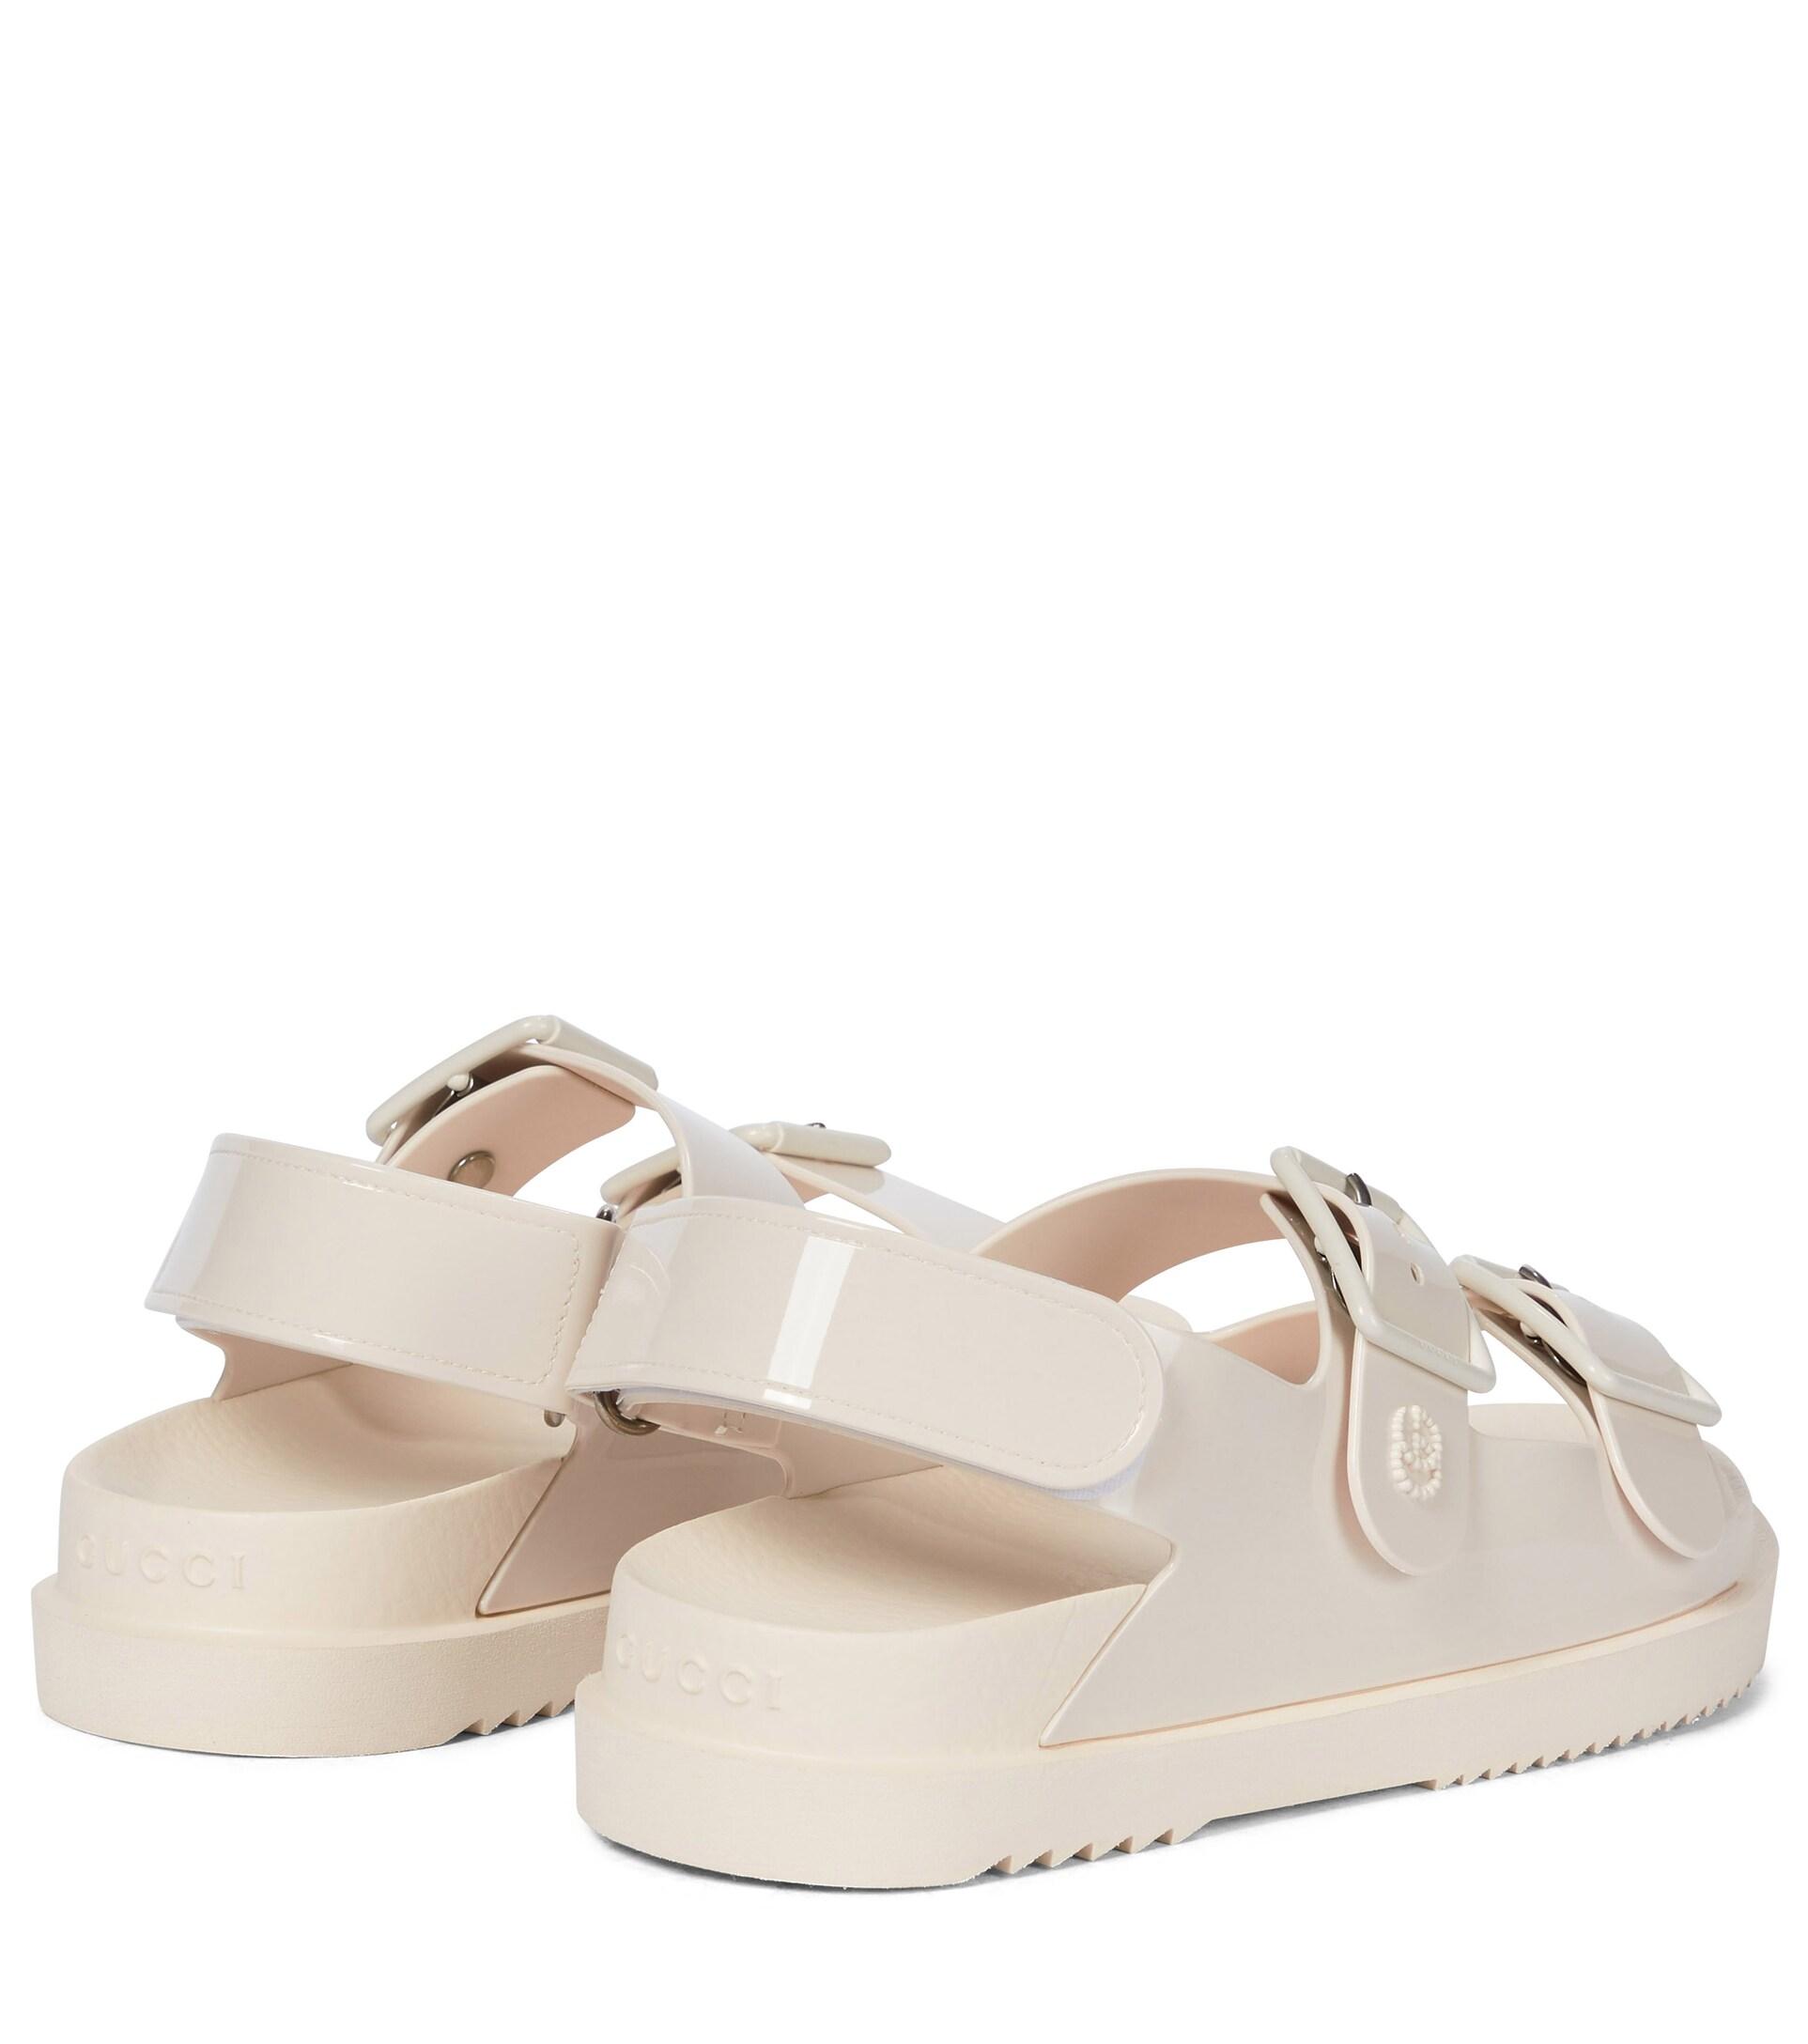 Sandal Gucci White size 6 US in Rubber - 34176966